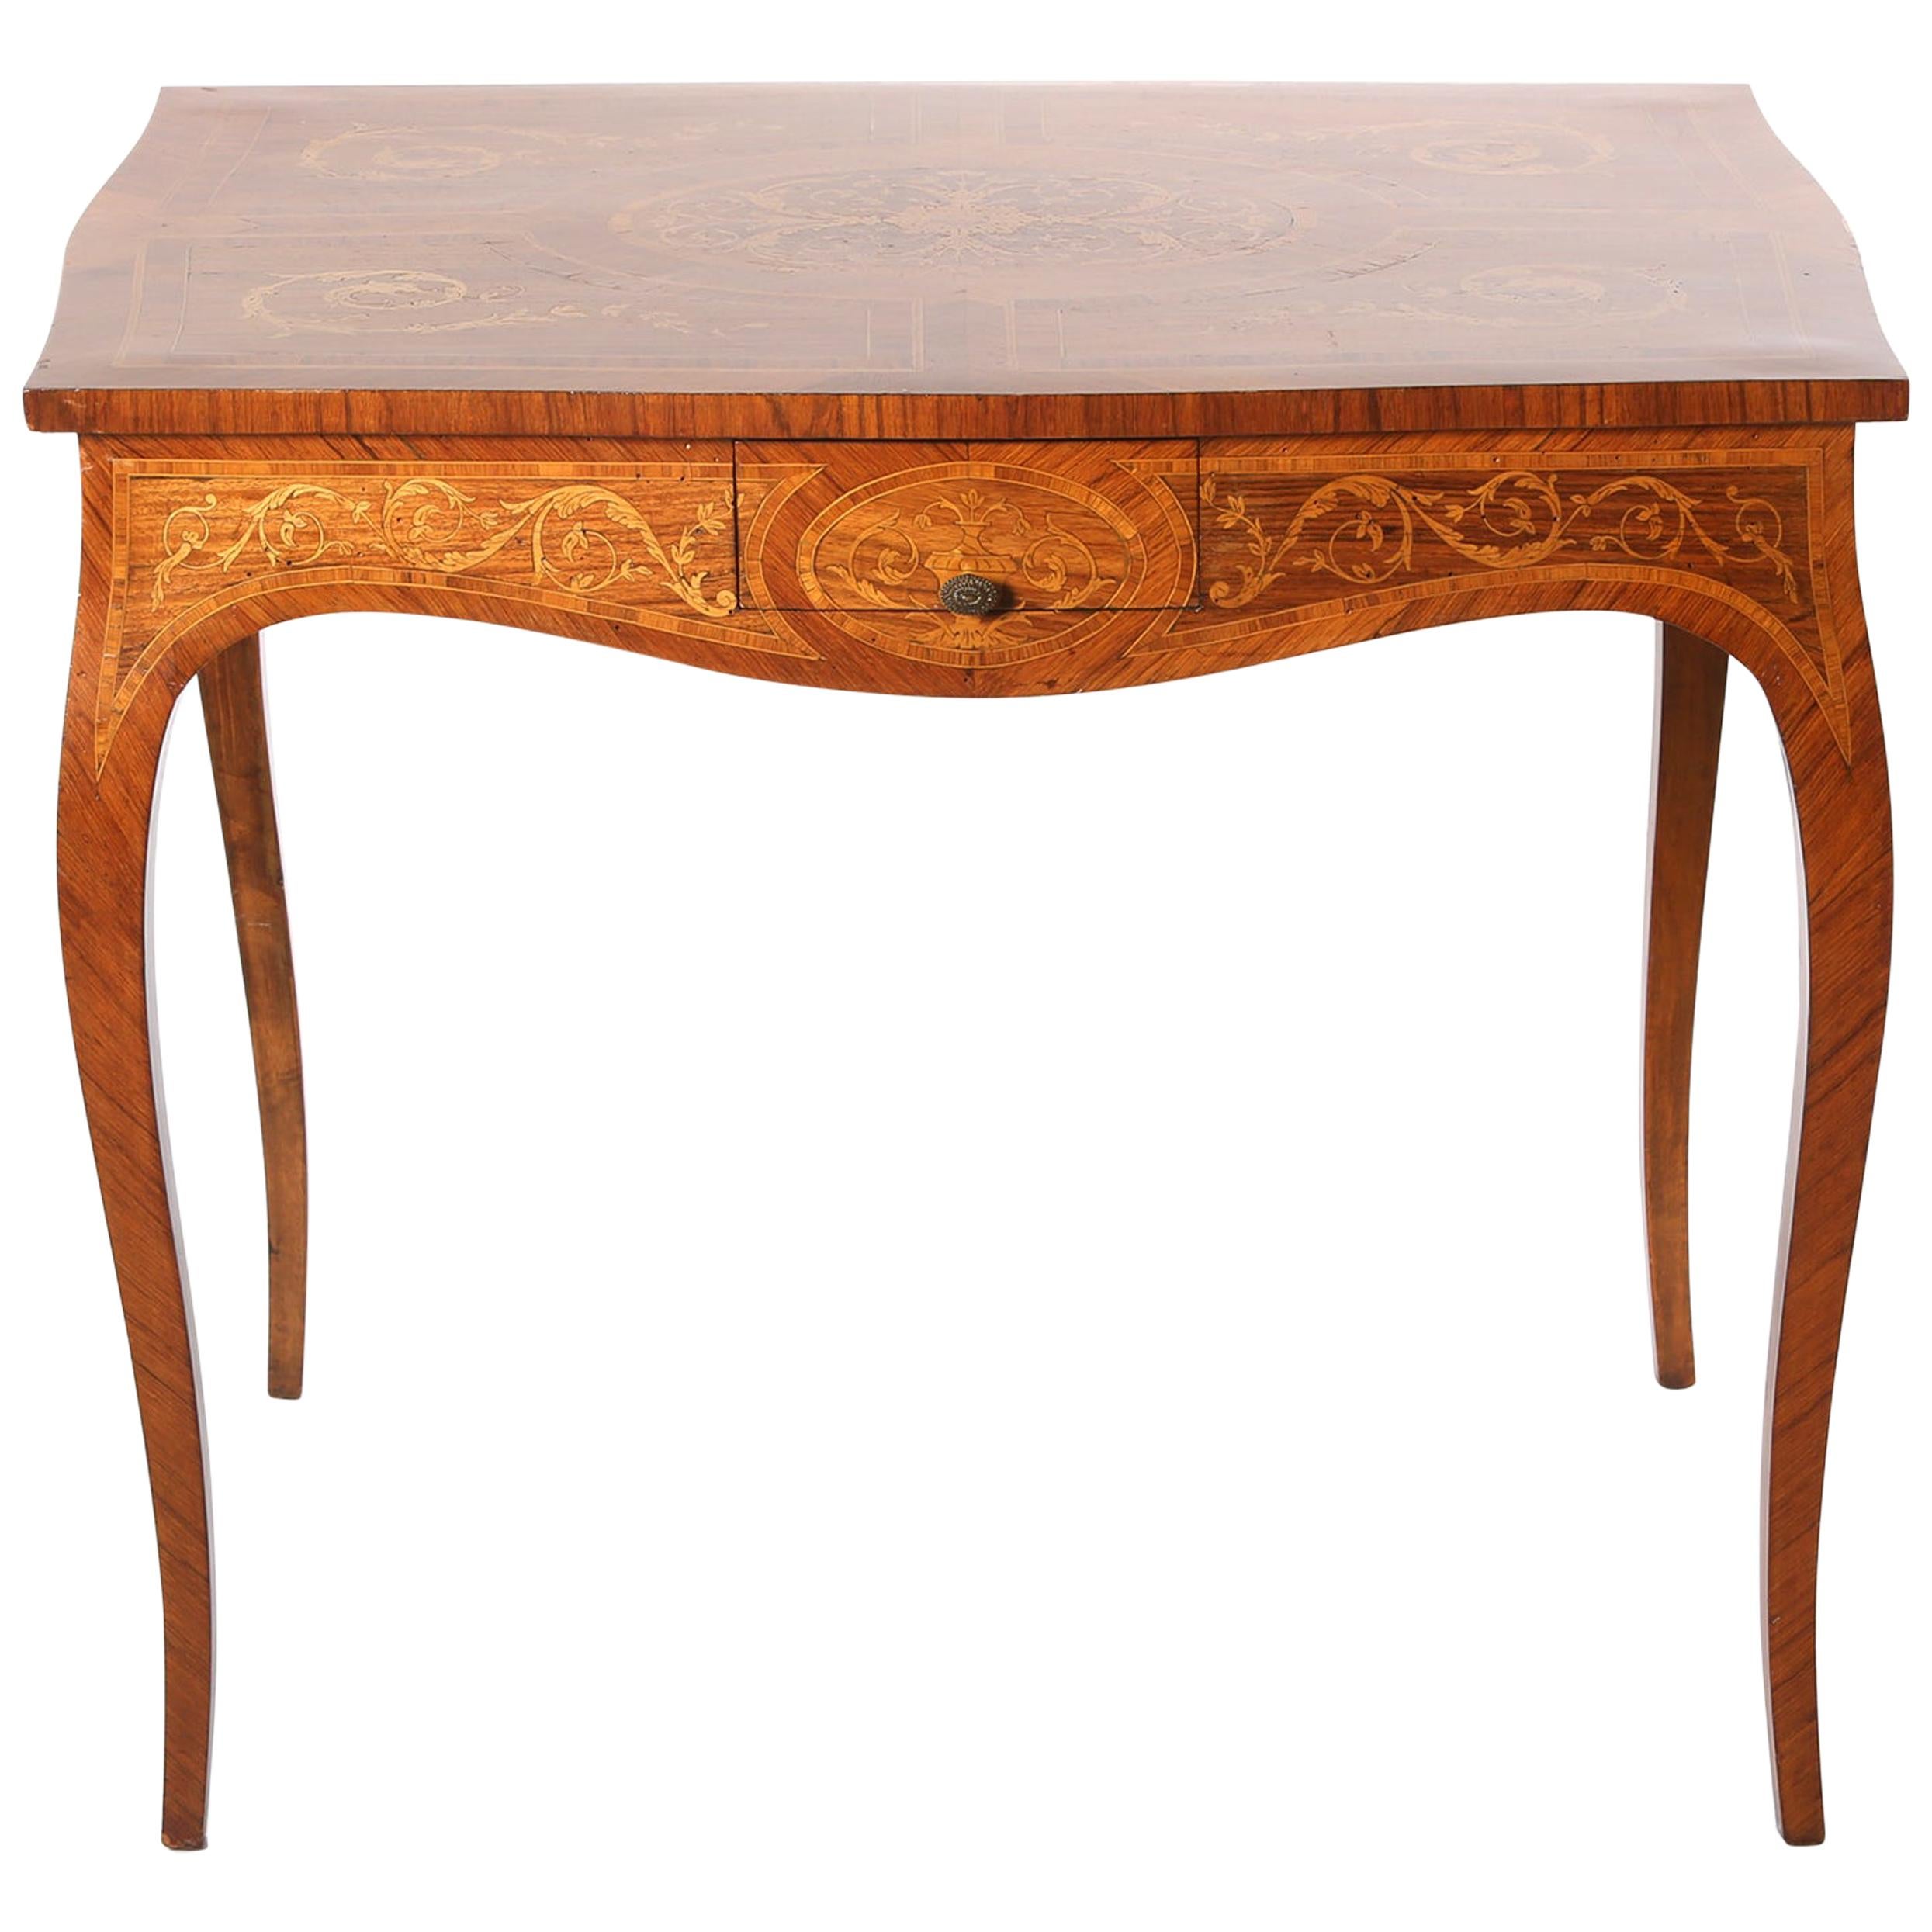 Mid-19th Century Dutch Marquetry Center Table